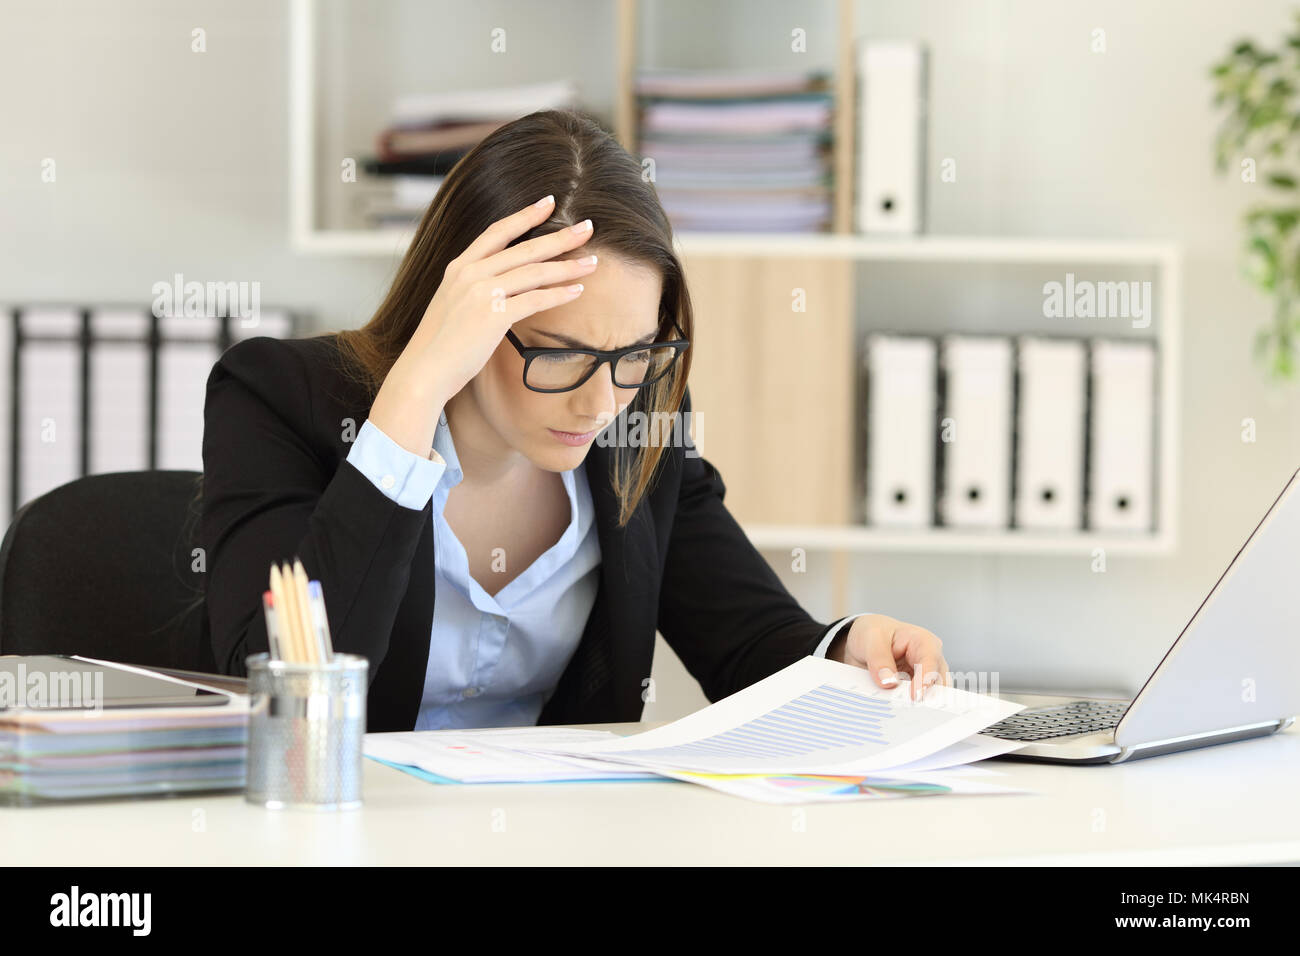 Worried executive checking sales decrease in a negative chart Stock Photo